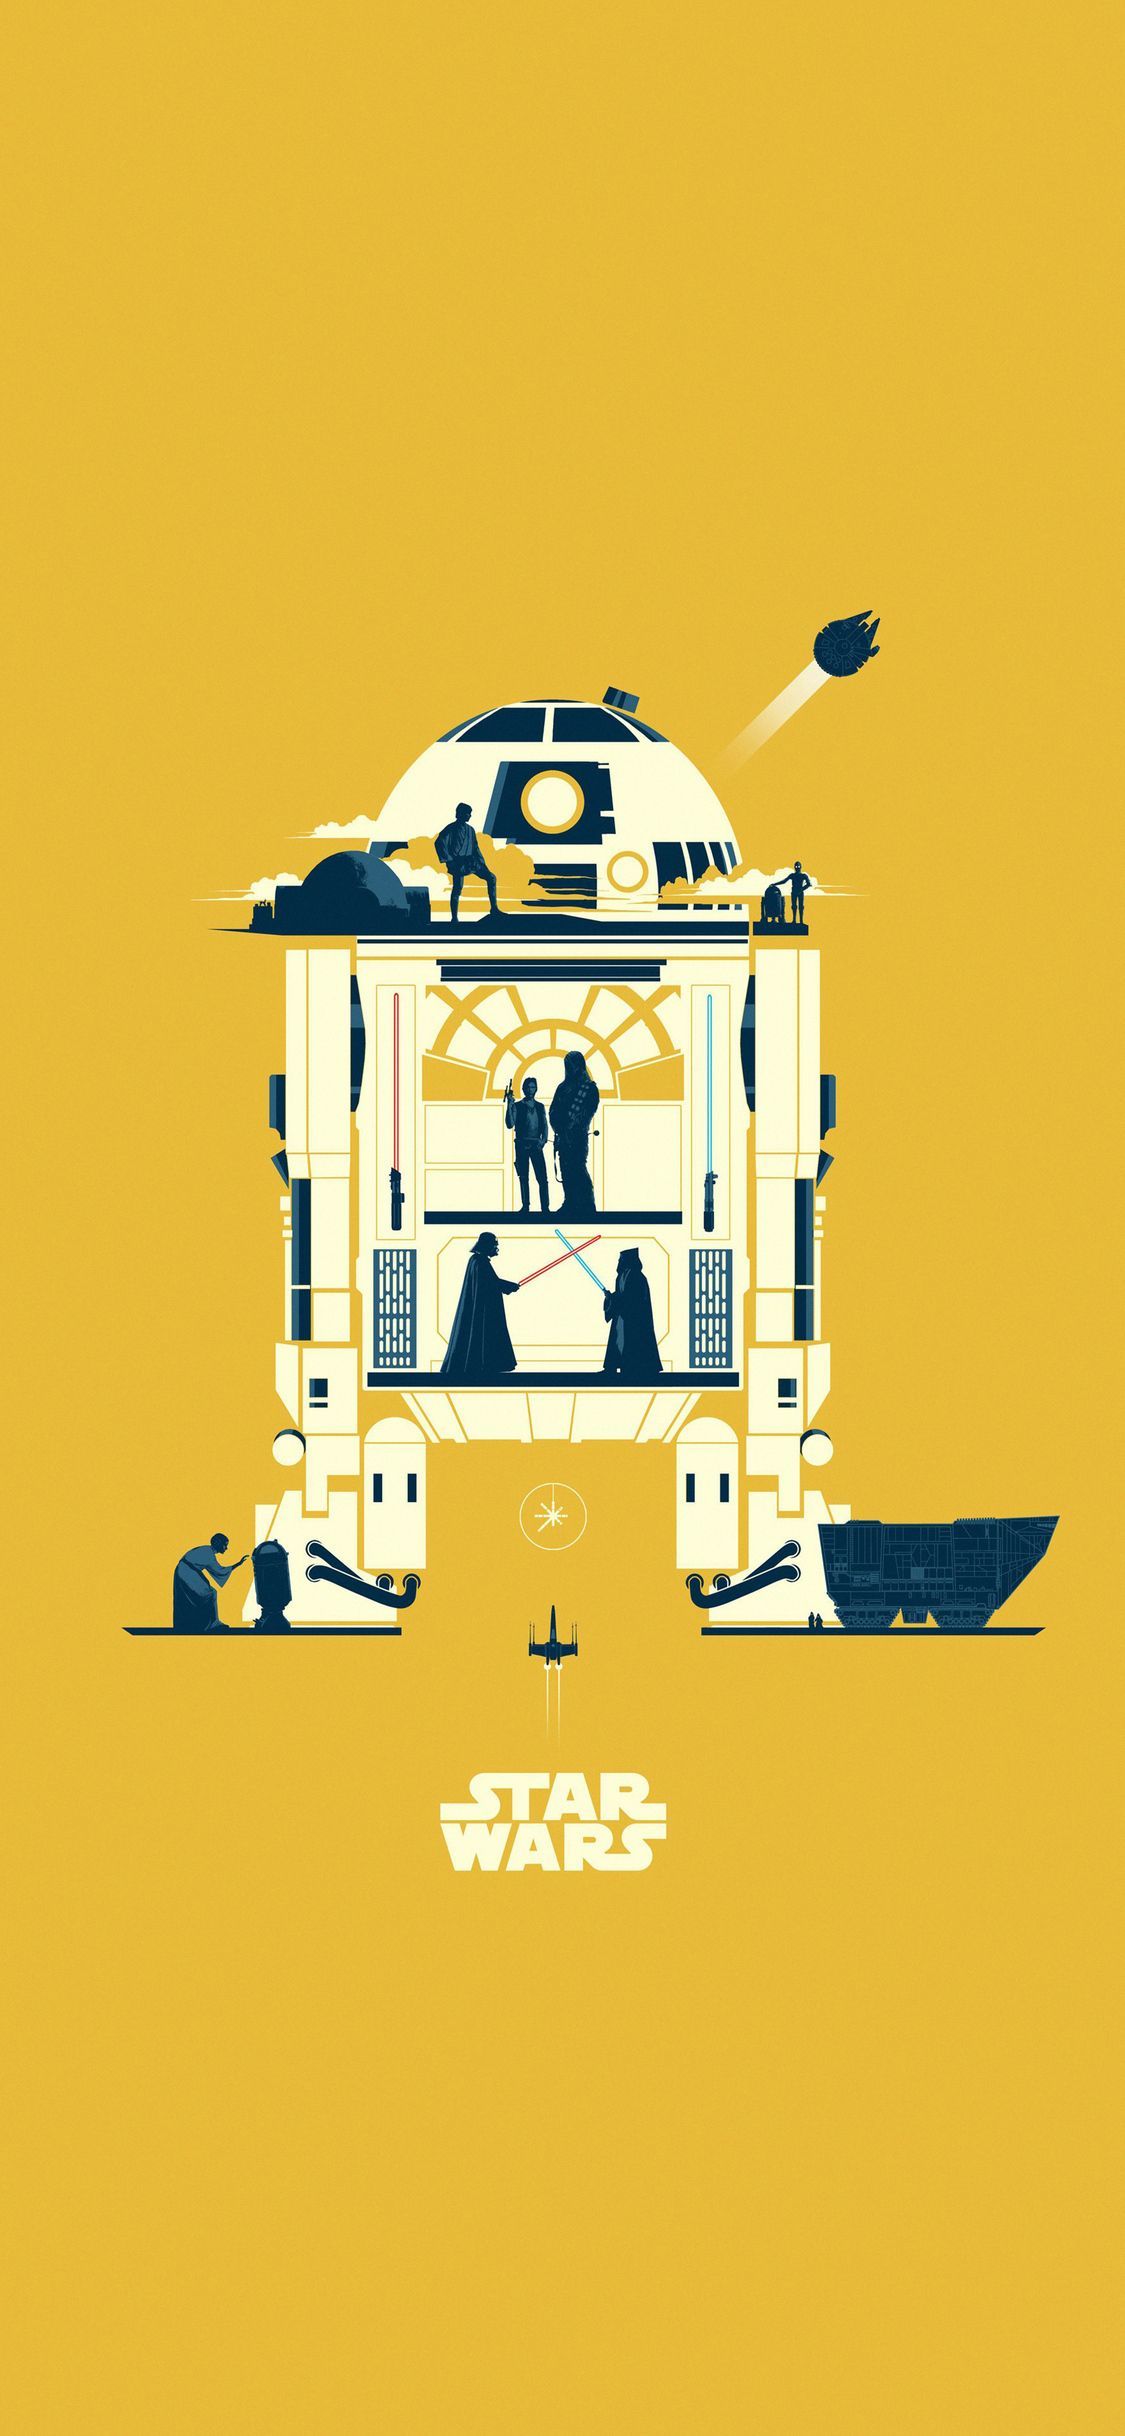 A poster with star wars characters on it - Star Wars